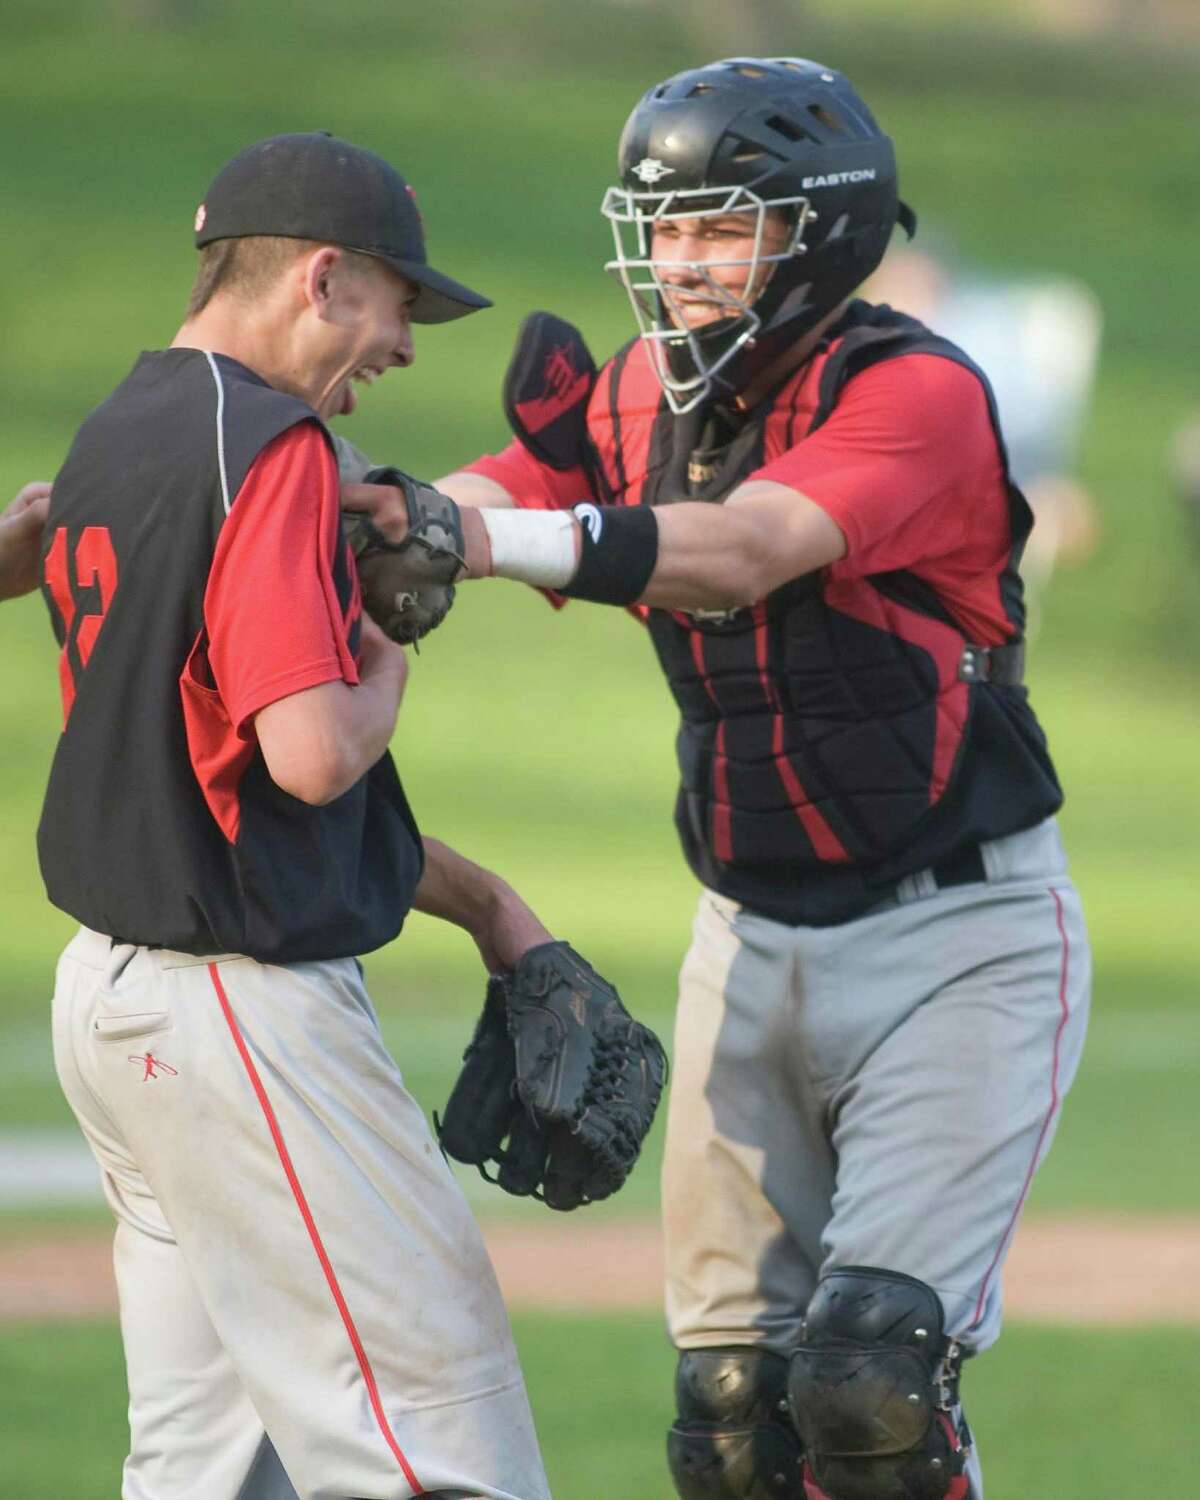 Pomperaug's David Cherry receives congratulations from catcher Matt Calzone after pitching a no-hitter against Immaculate Monday in Danbury.